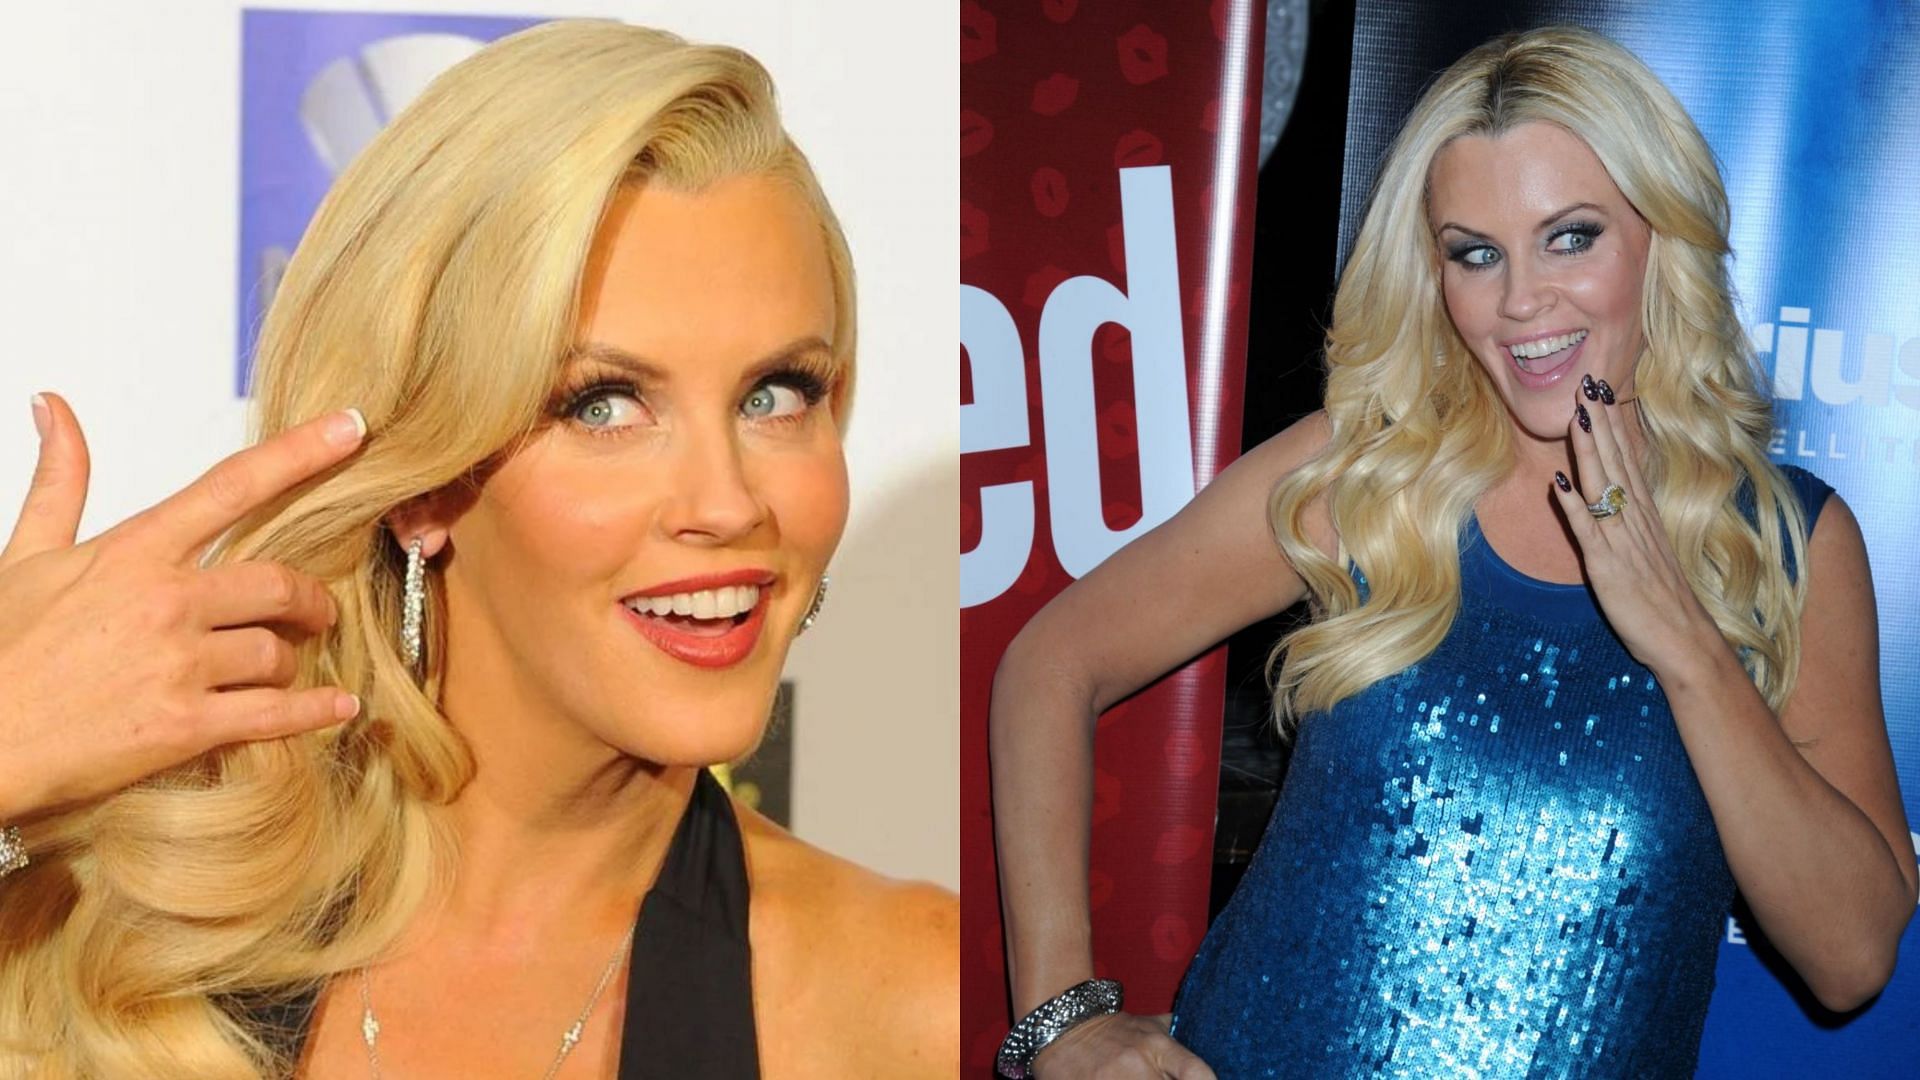 Jenny McCarthy made multiple appearances on WWE TV